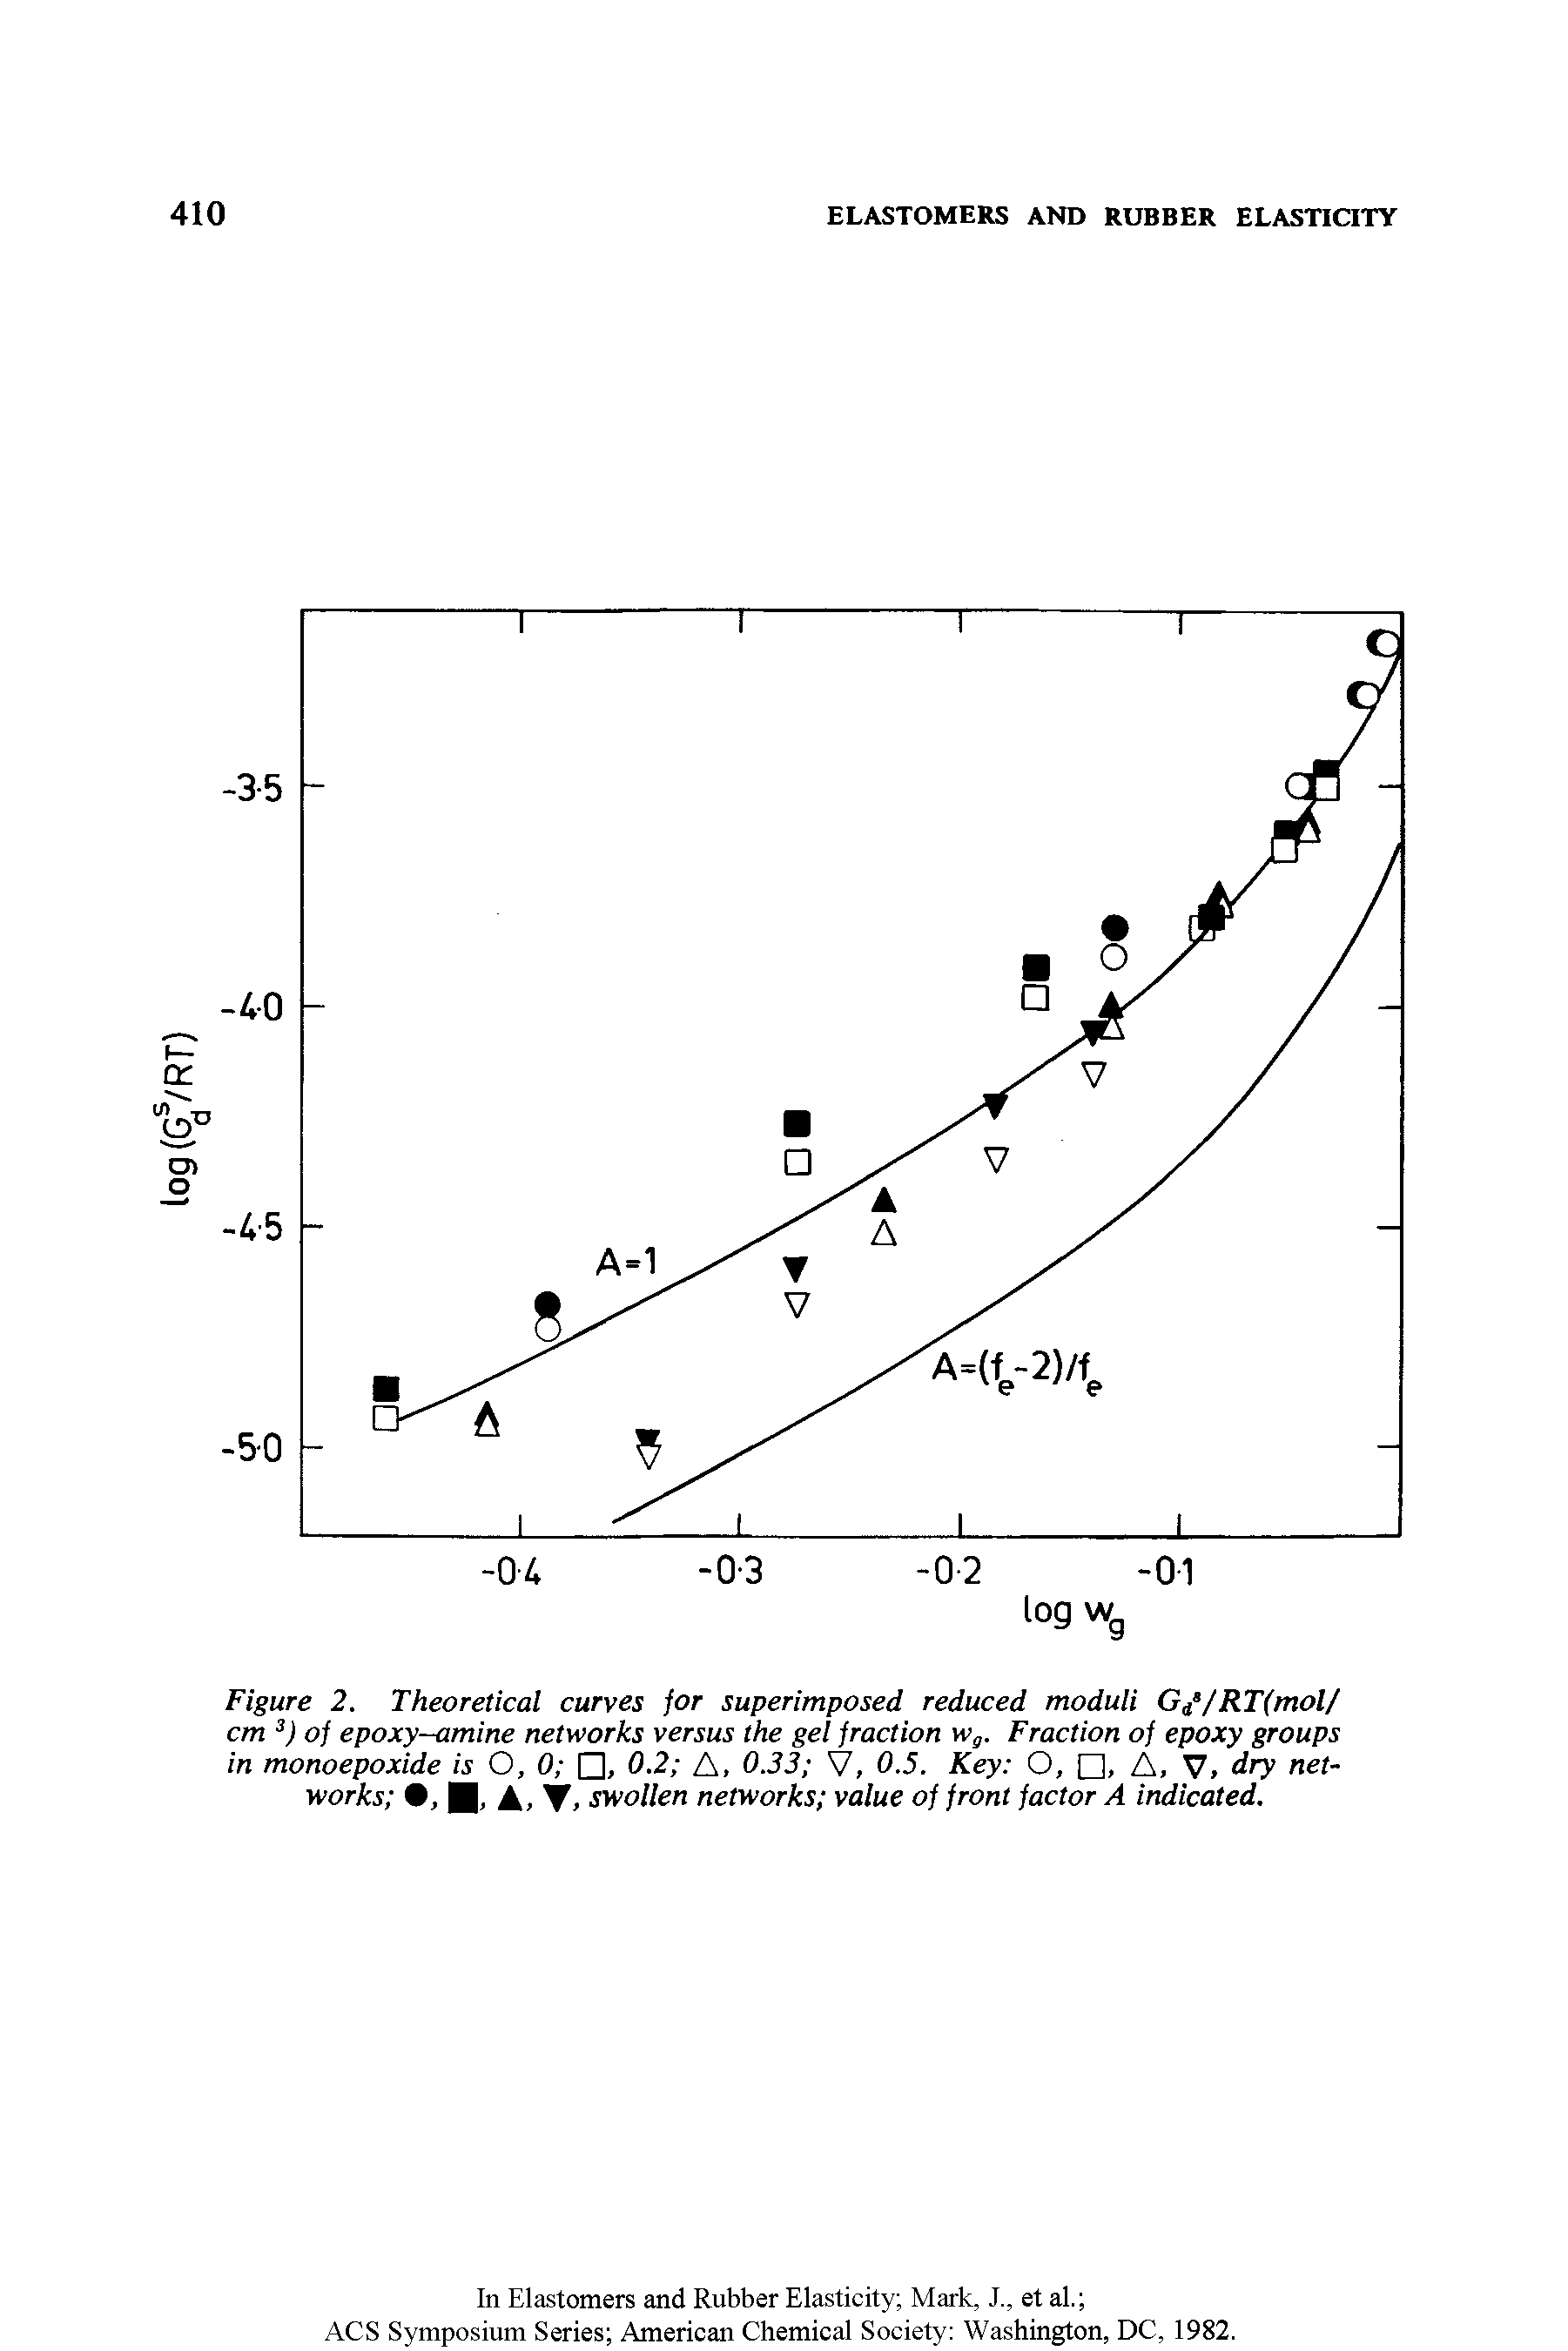 Figure 2. Theoretical curves for superimposed reduced moduli Gd /RT(mol/ cm 3) of epoxy-amine networks versus the gel fraction ws. Fraction of epoxy groups in monoepoxide is O, 0 , 0.2 A, 0.33 V, 0.5. Key O, , A, V, dry networks , A, , swollen networks value of front factor A indicated.